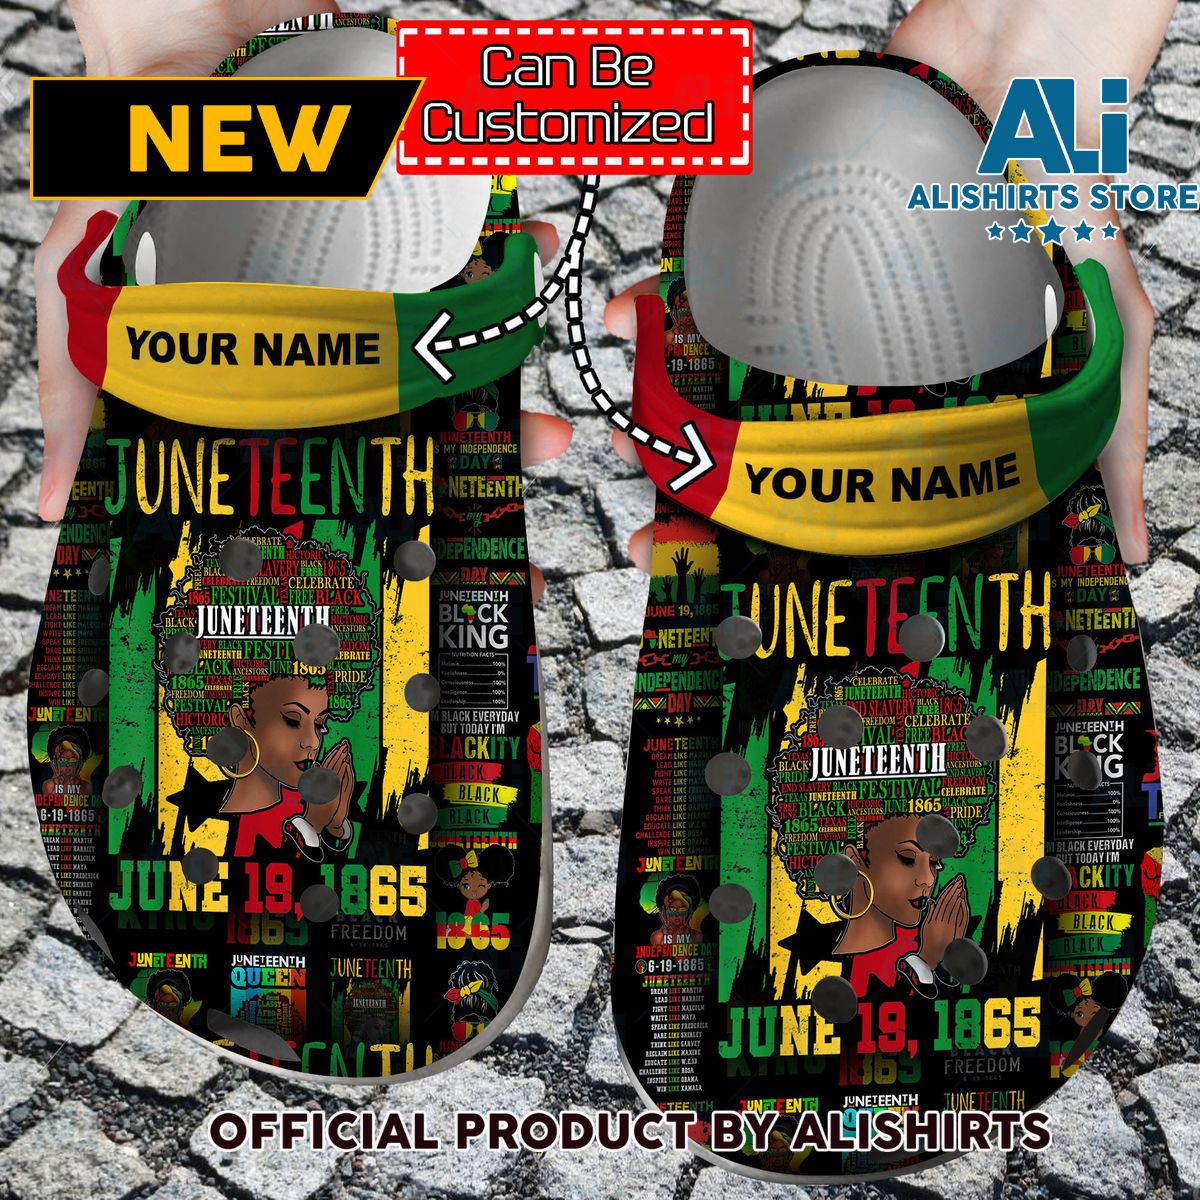 Personalized Juneteenth Black Americans Independence 1865 Crocs Crocband Clog Shoes